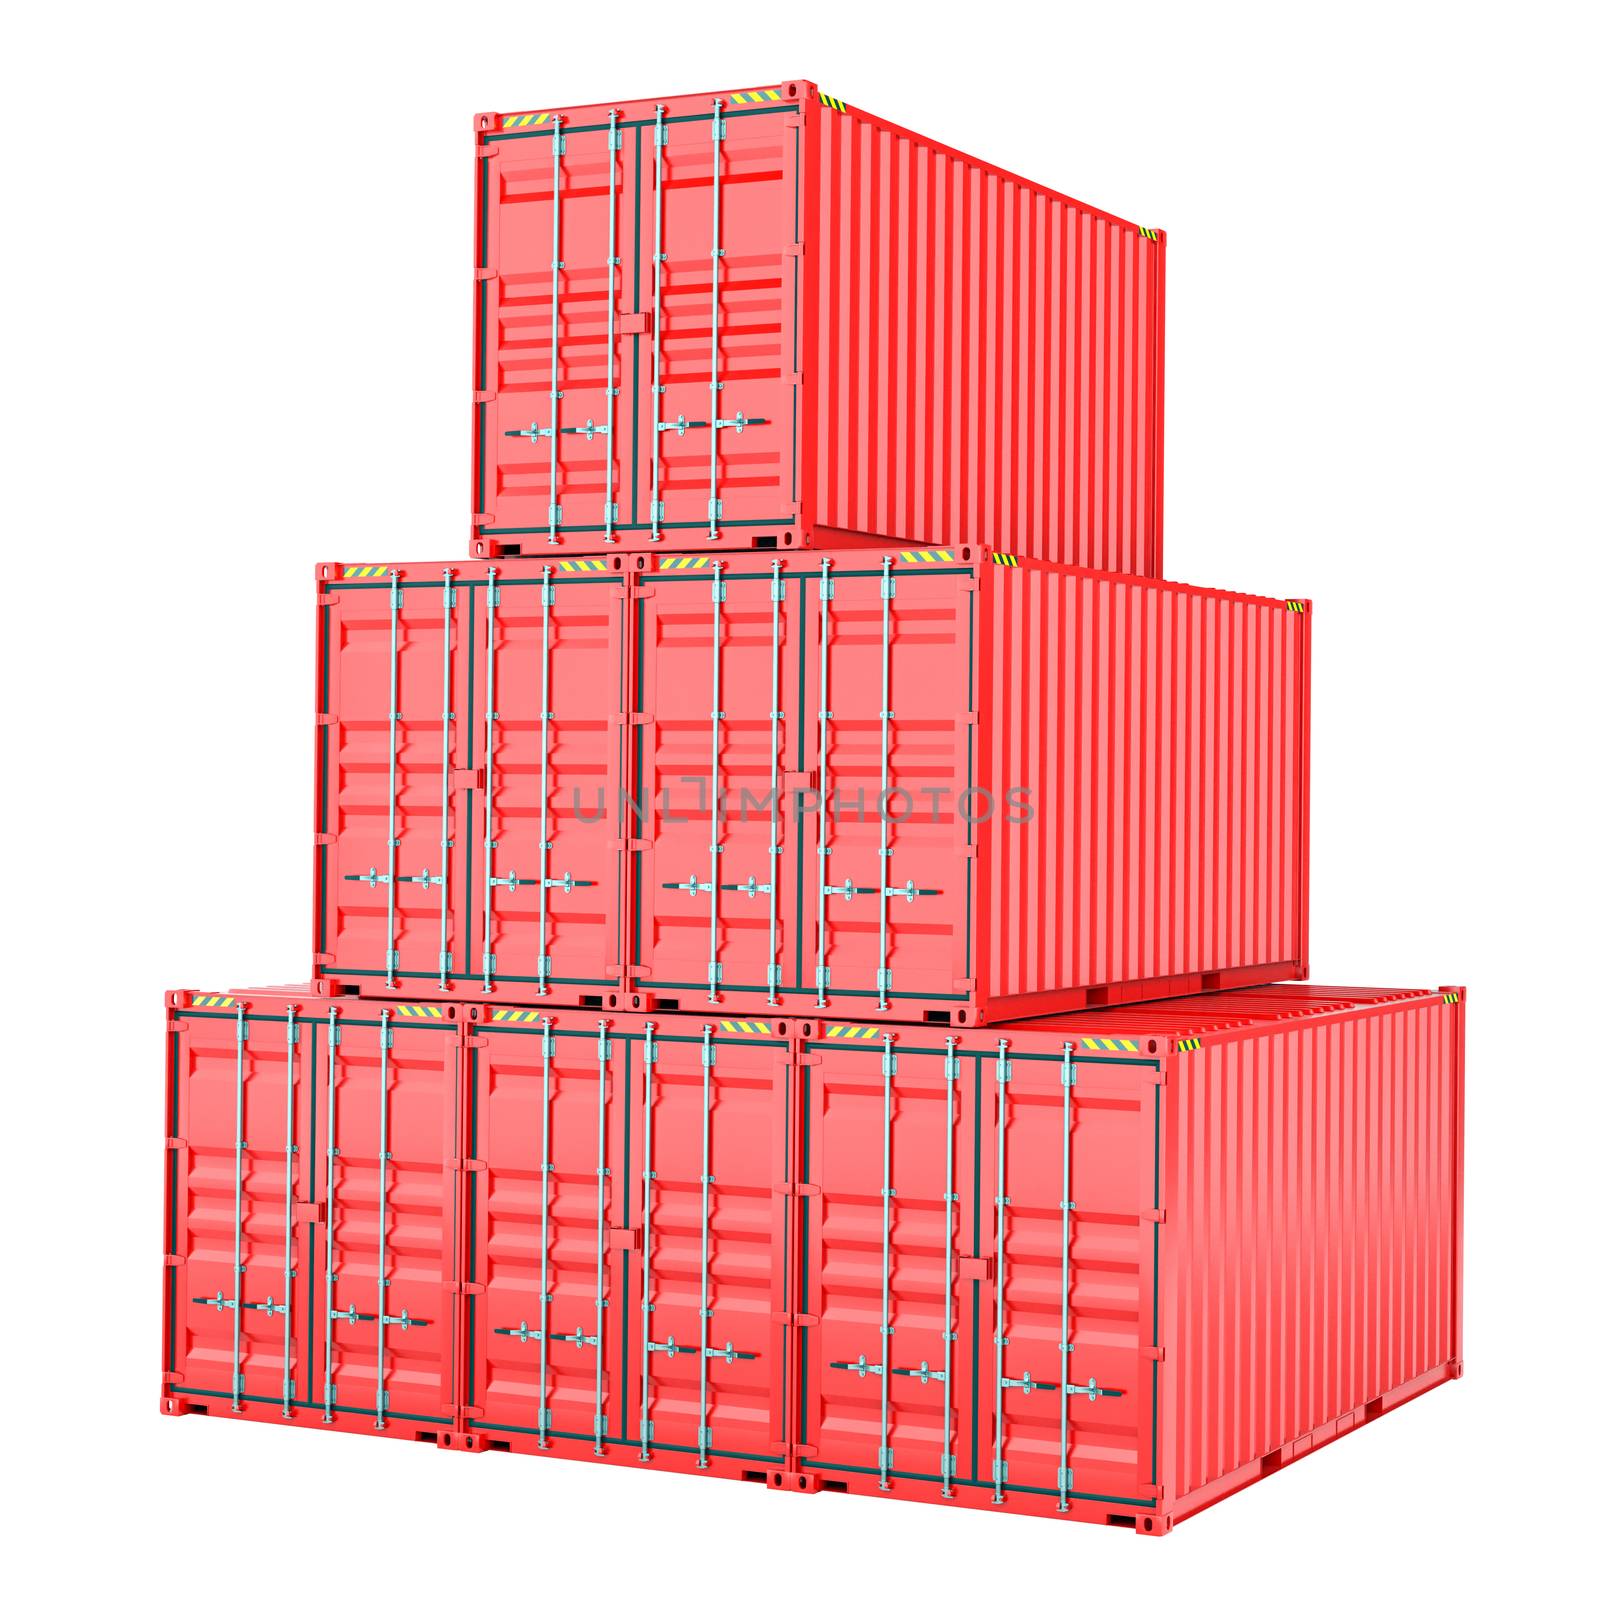 Stacked red cargo containers over white 3D Illustration